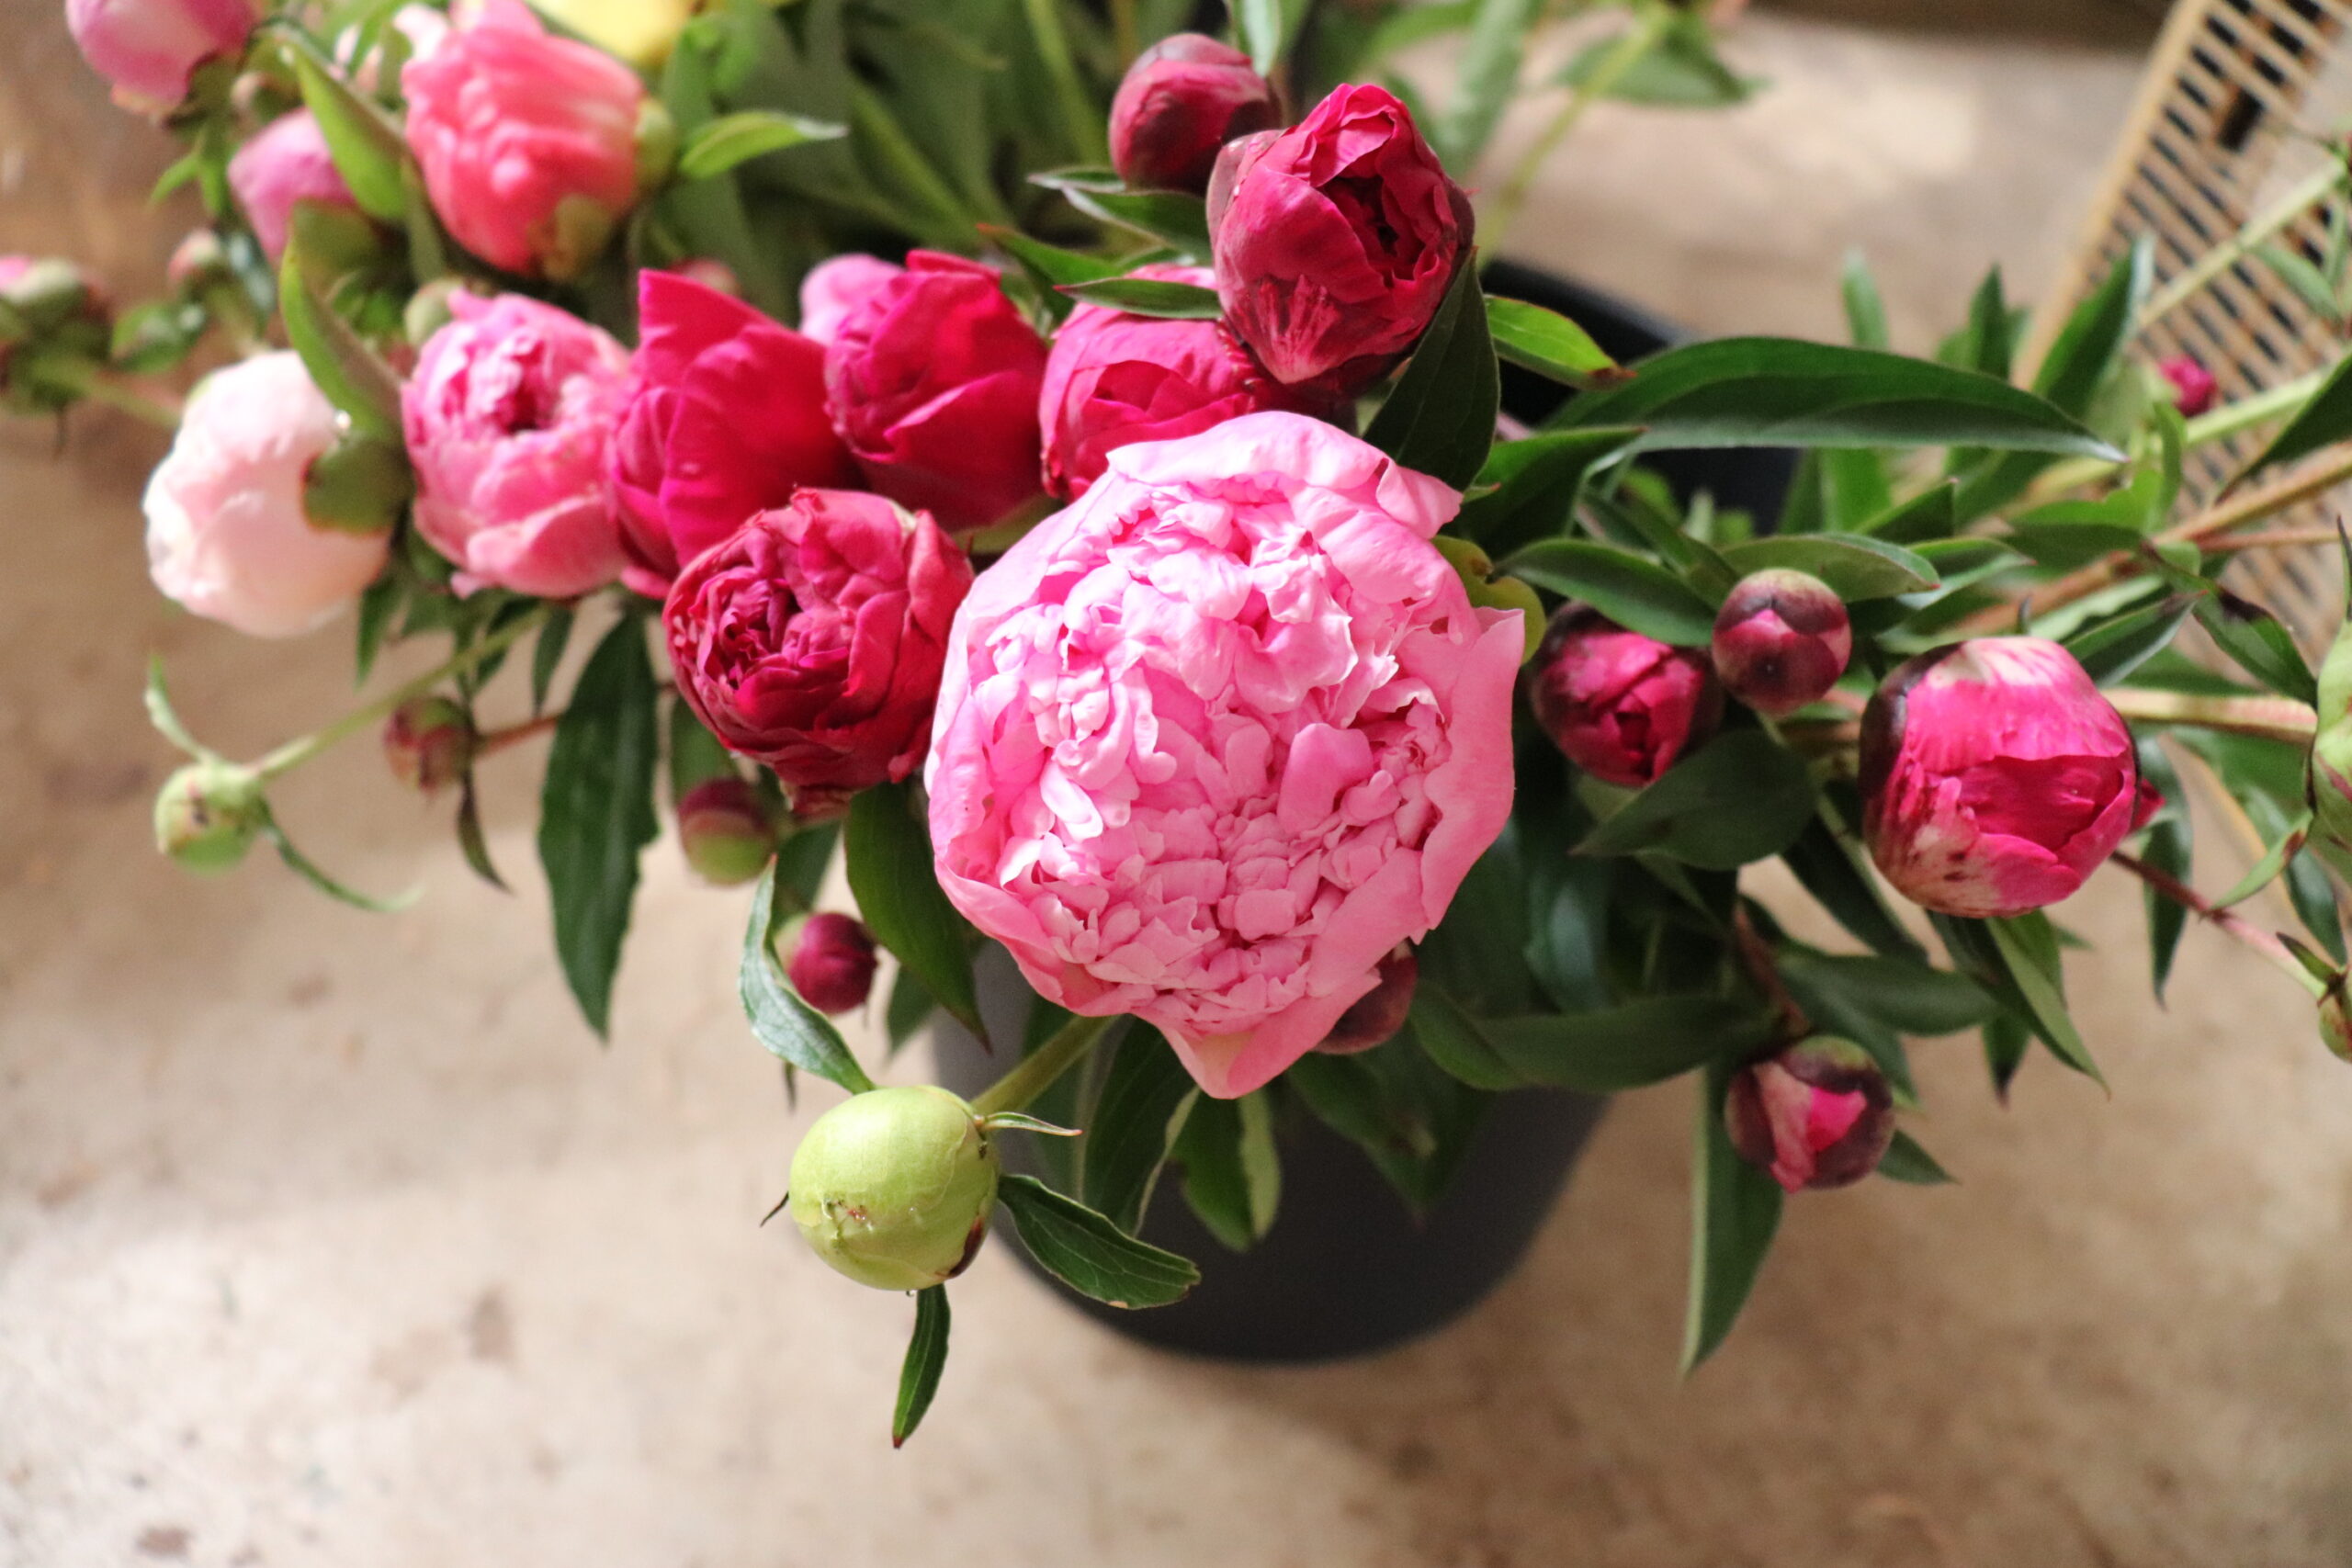 Some cut peonies, ready to become part of a bouquet.